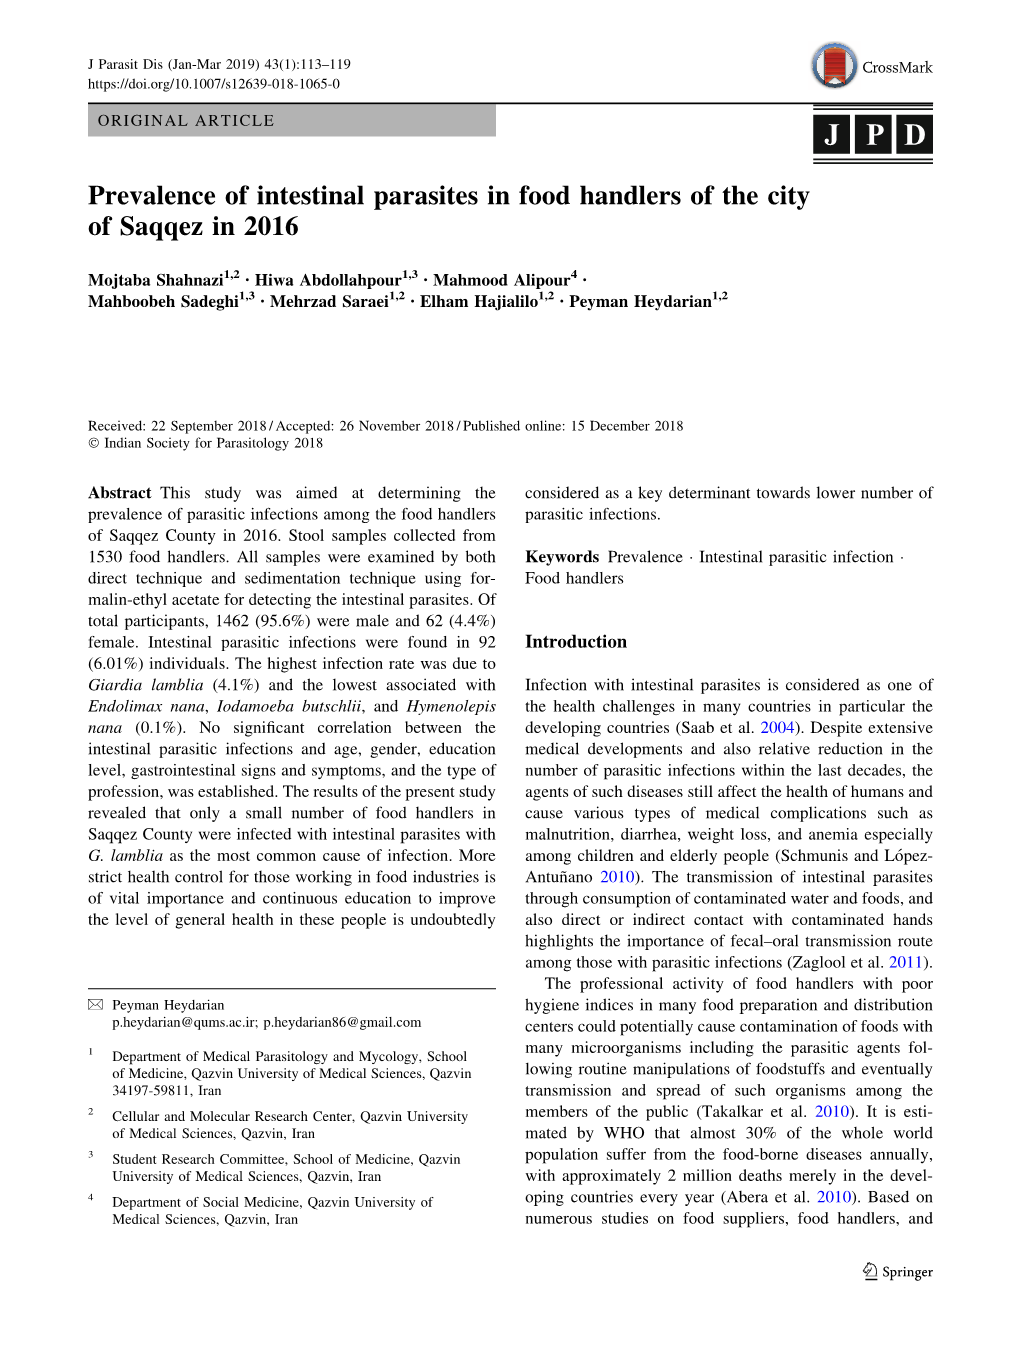 Prevalence of Intestinal Parasites in Food Handlers of the City of Saqqez in 2016